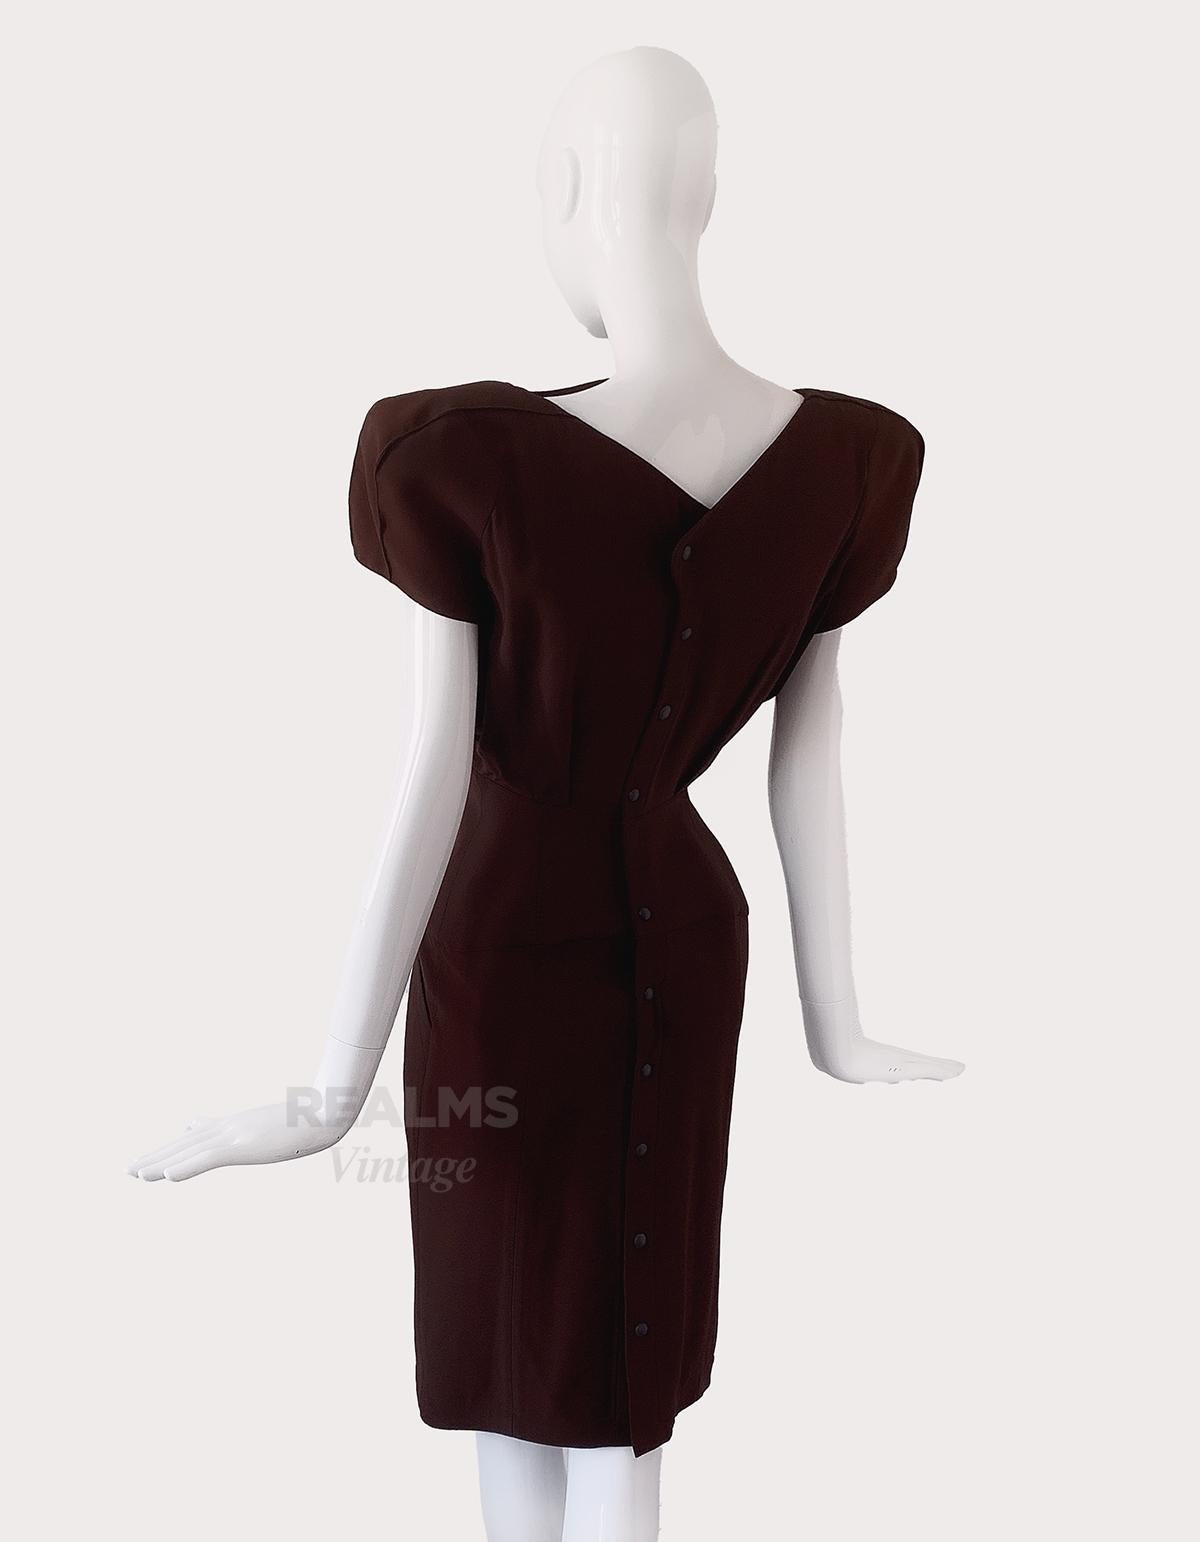 Women's Iconic and Extremely Rare Thierry Mugler Dress SS 1988 Sculptural  For Sale